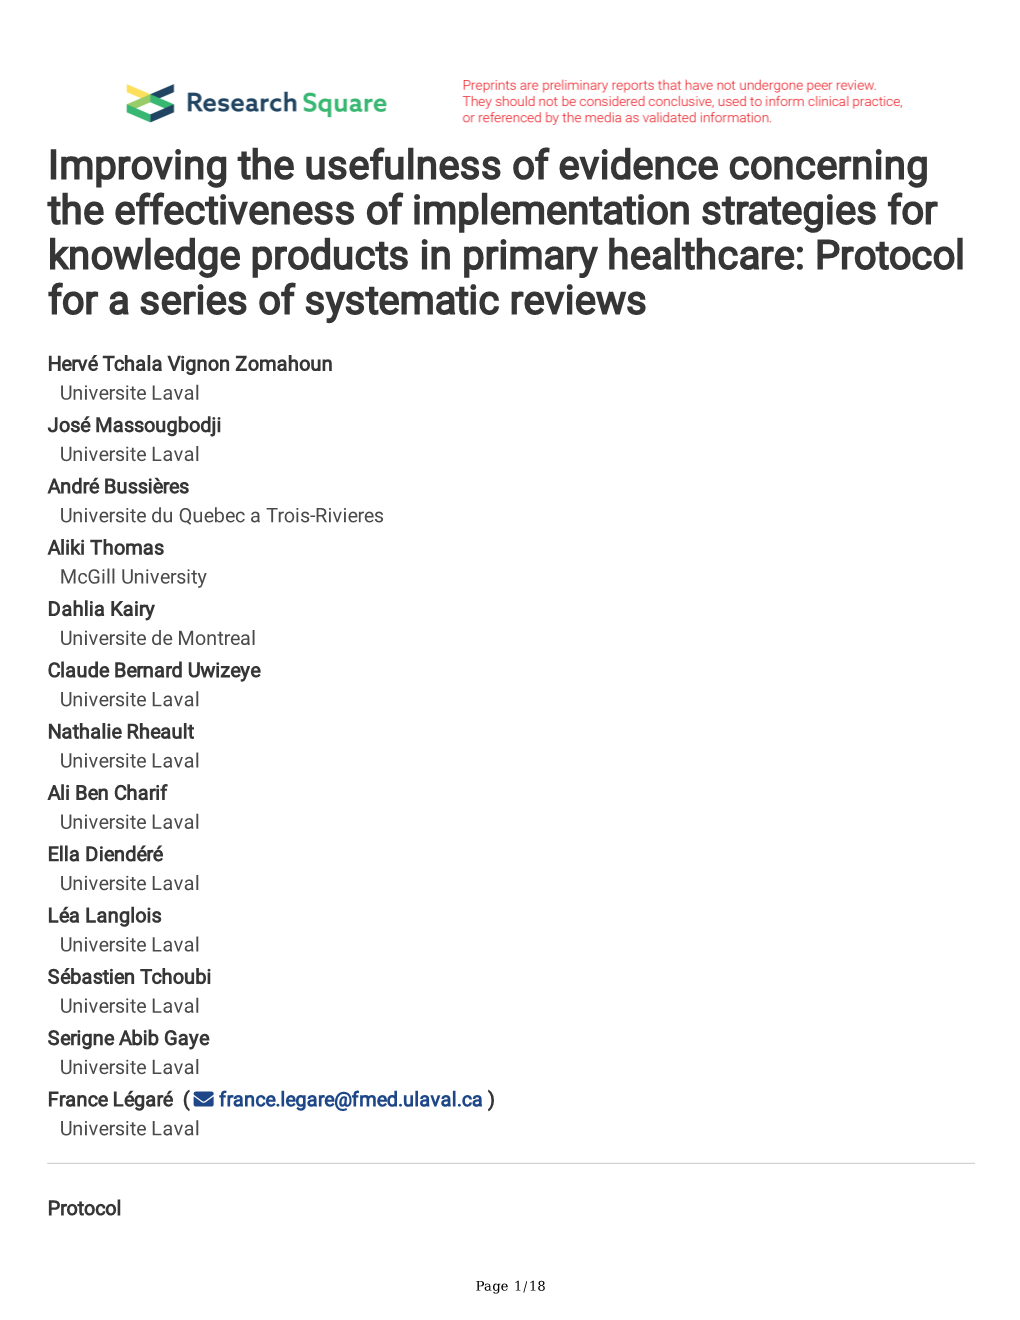 Improving the Usefulness of Evidence Concerning the Effectiveness of Implementation Strategies for Knowledge Products in Primary